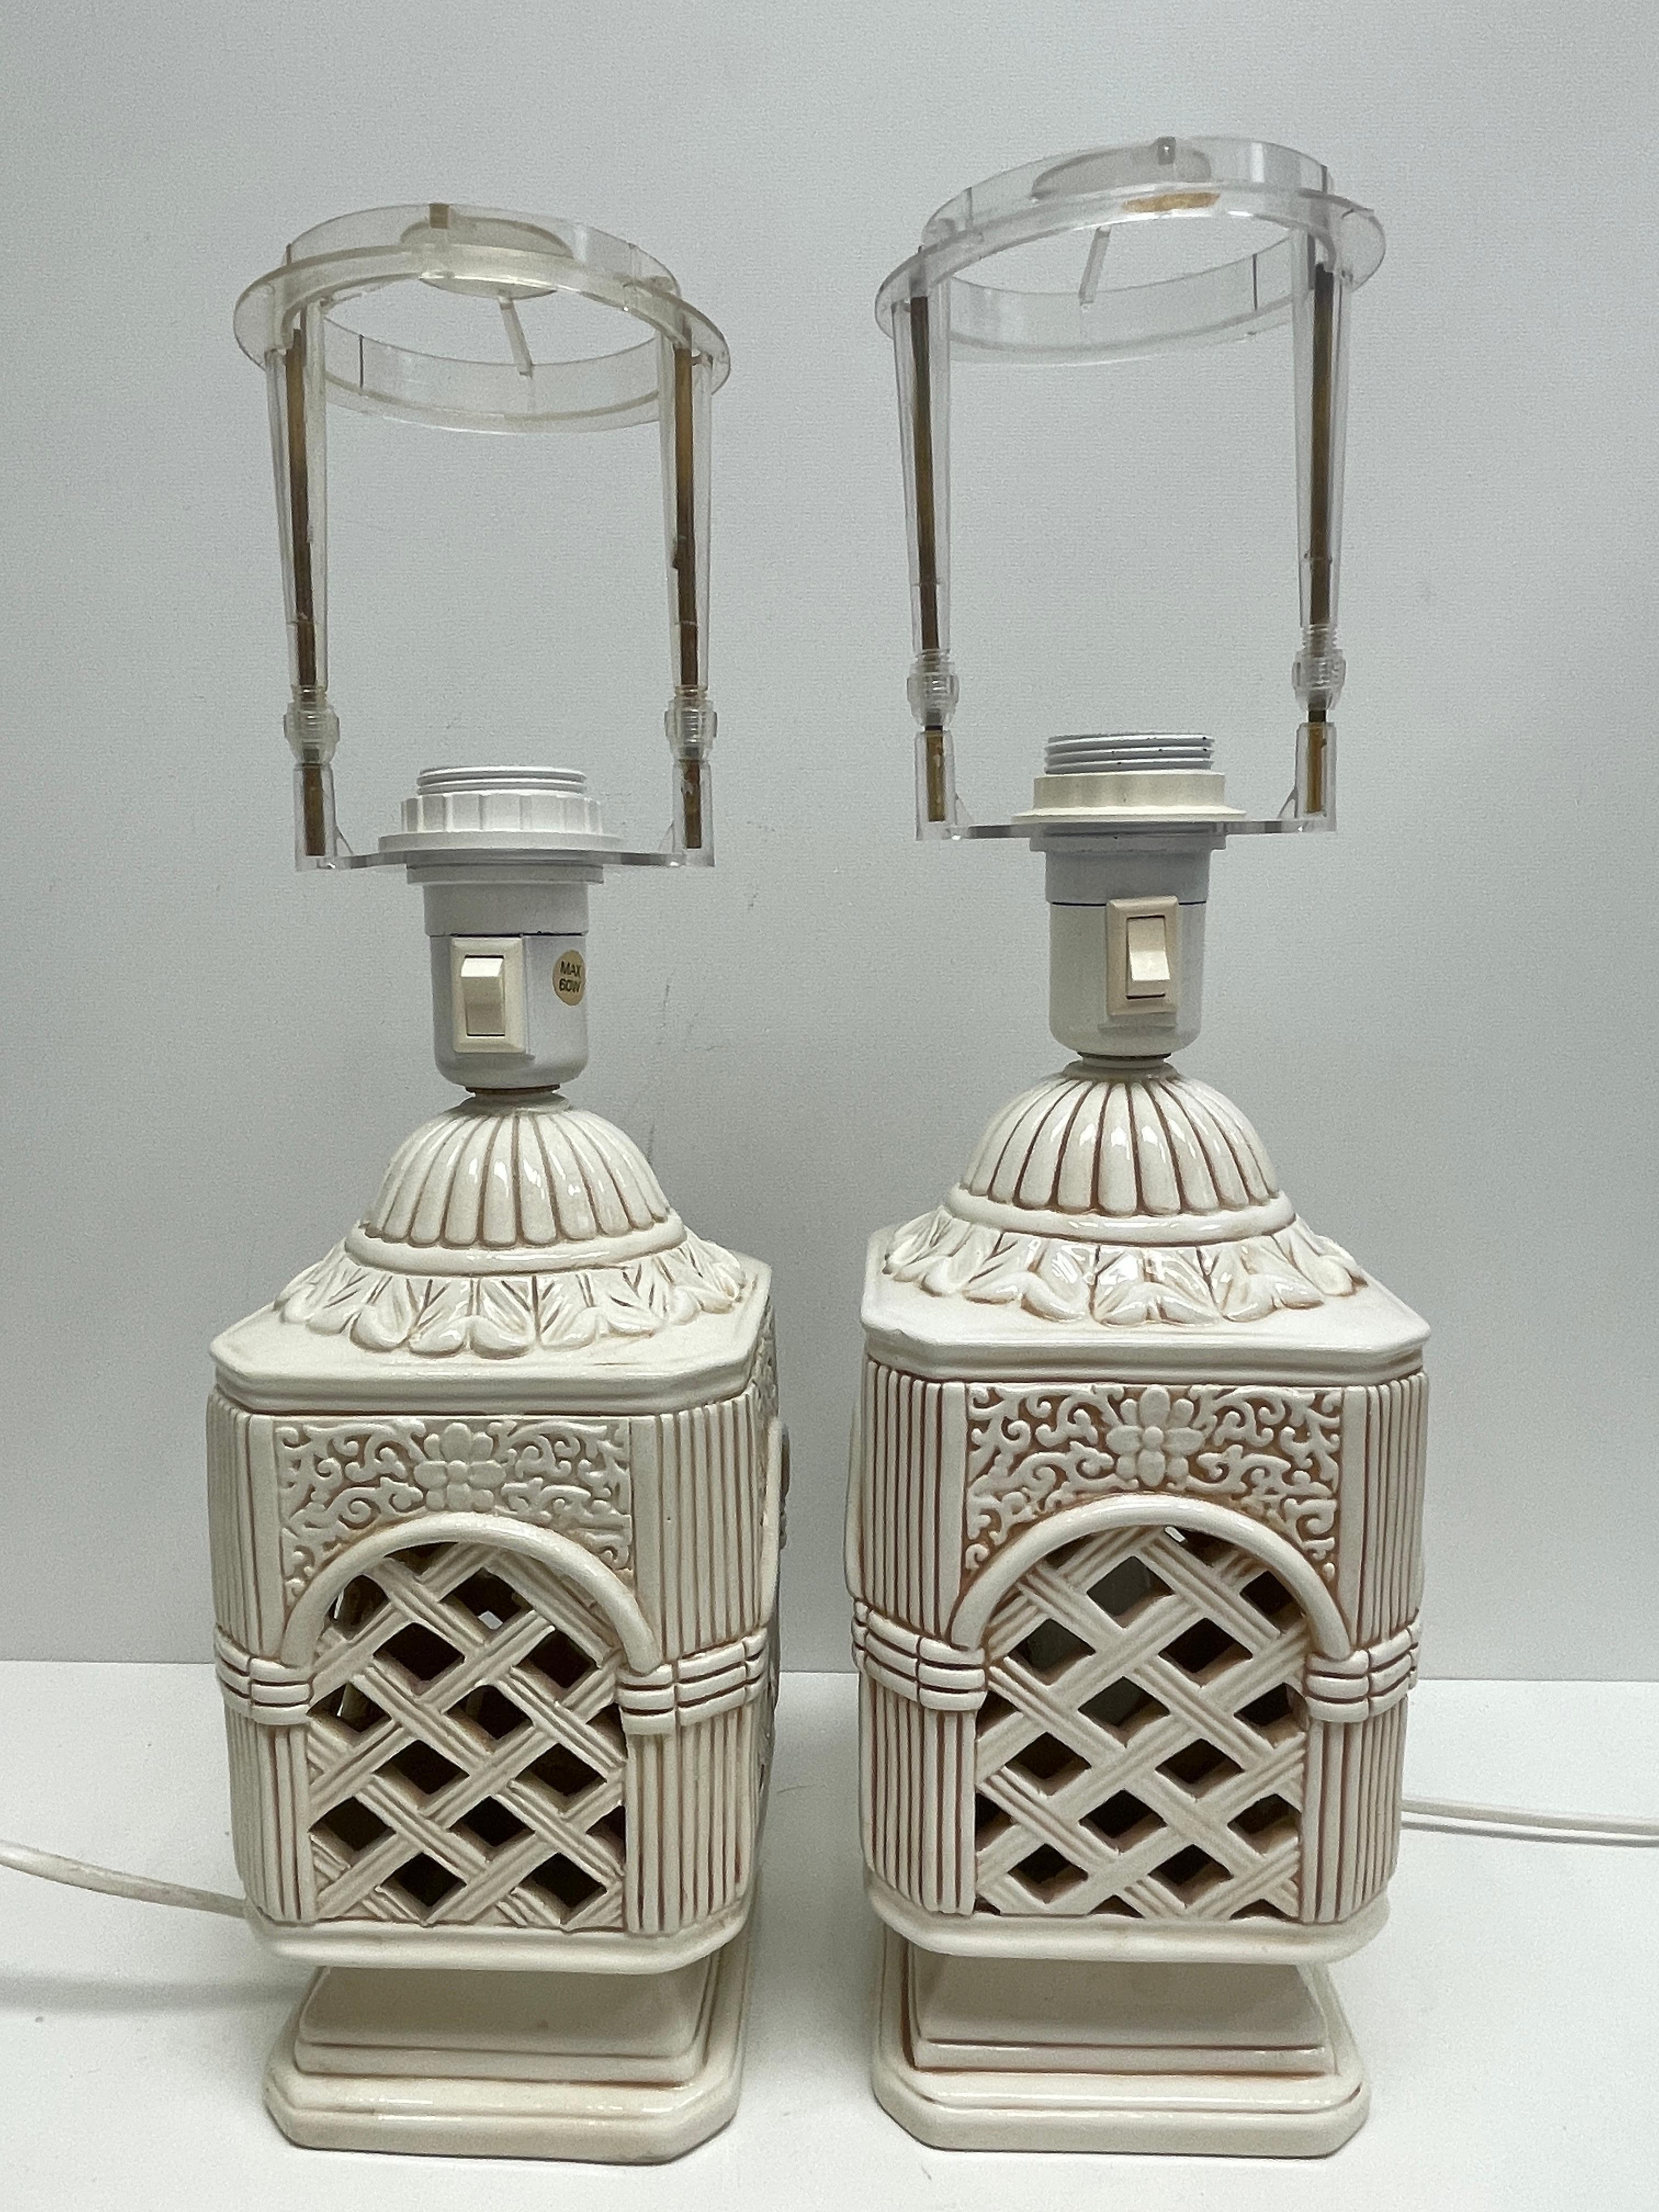 Hollywood Regency Pair of Ceramic Table Lamps Pagoda Chinoiseries Style Vintage, Sweden For Sale